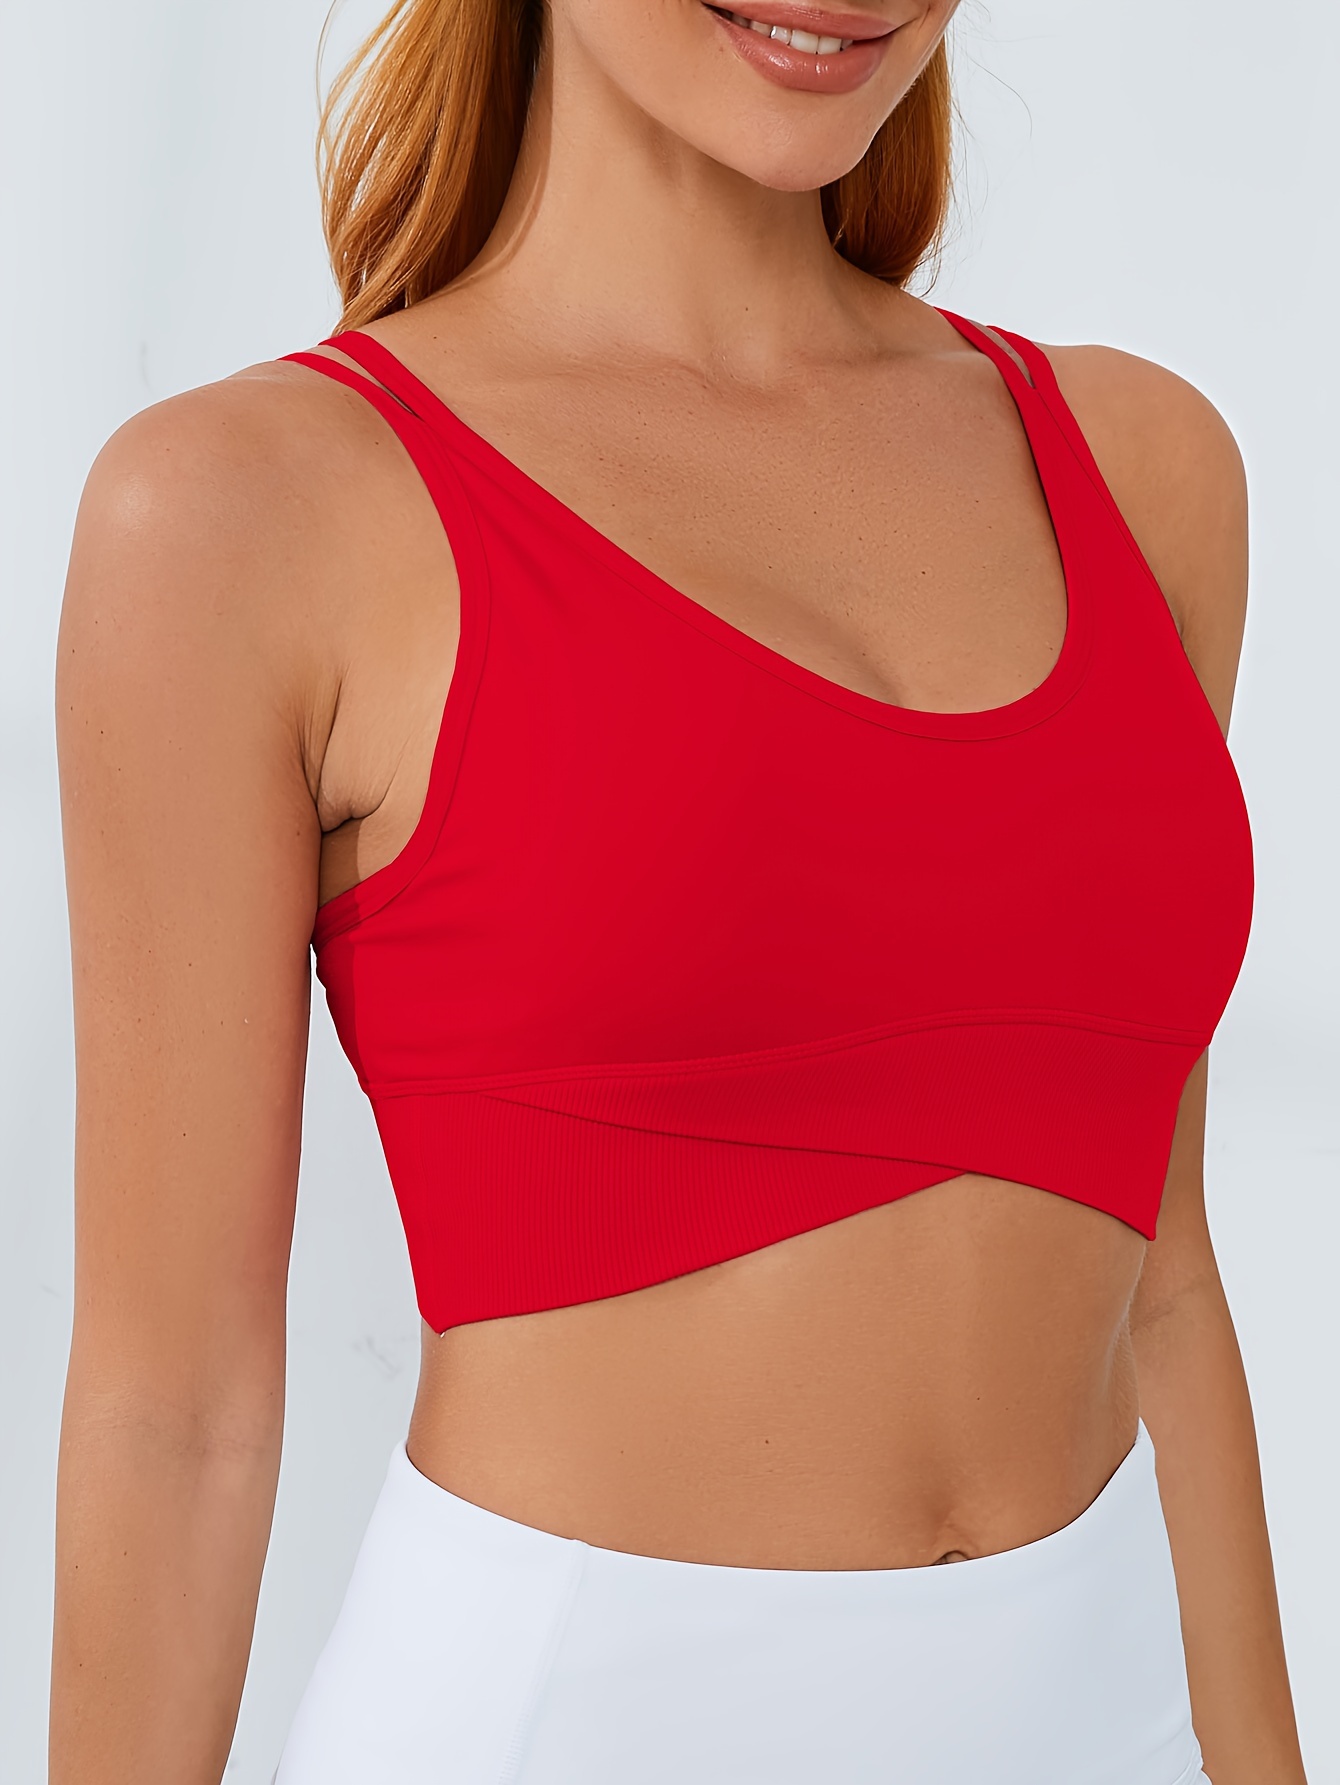 Padded Strappy Sports Bras for Women - Activewear Tops for Yoga Running  Fitness Red